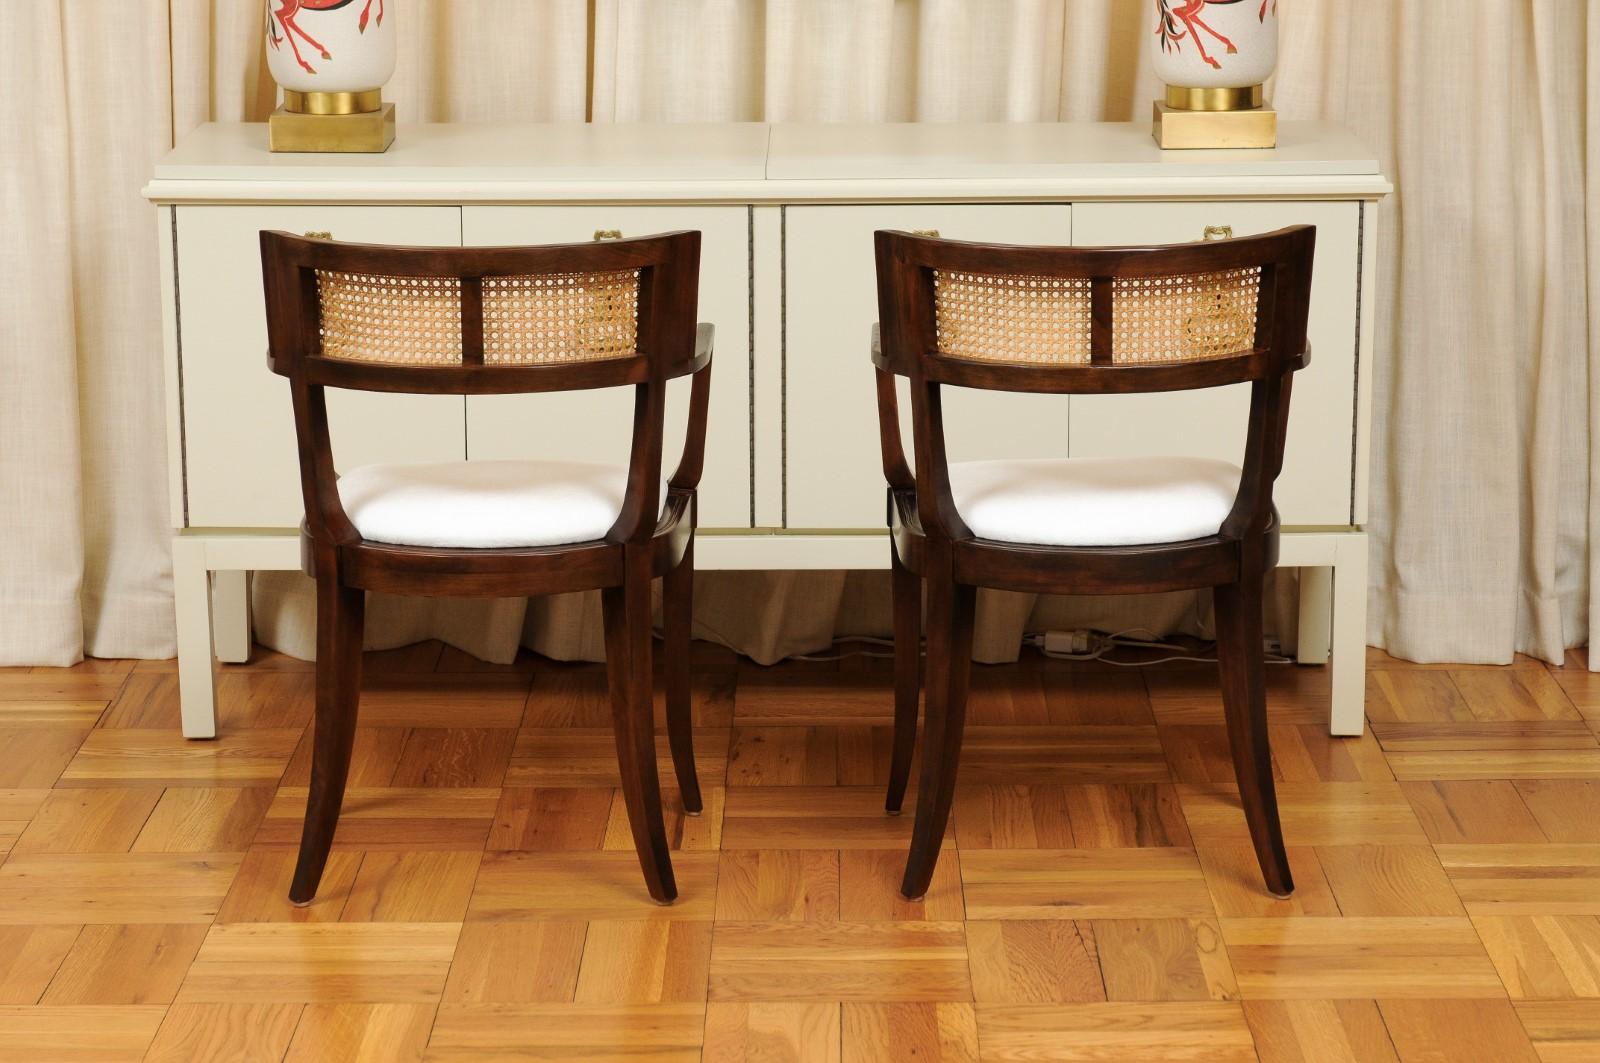 All Arms, Exquisite Set of 20 Klismos Cane Dining Chairs by Baker, circa 1958 For Sale 3